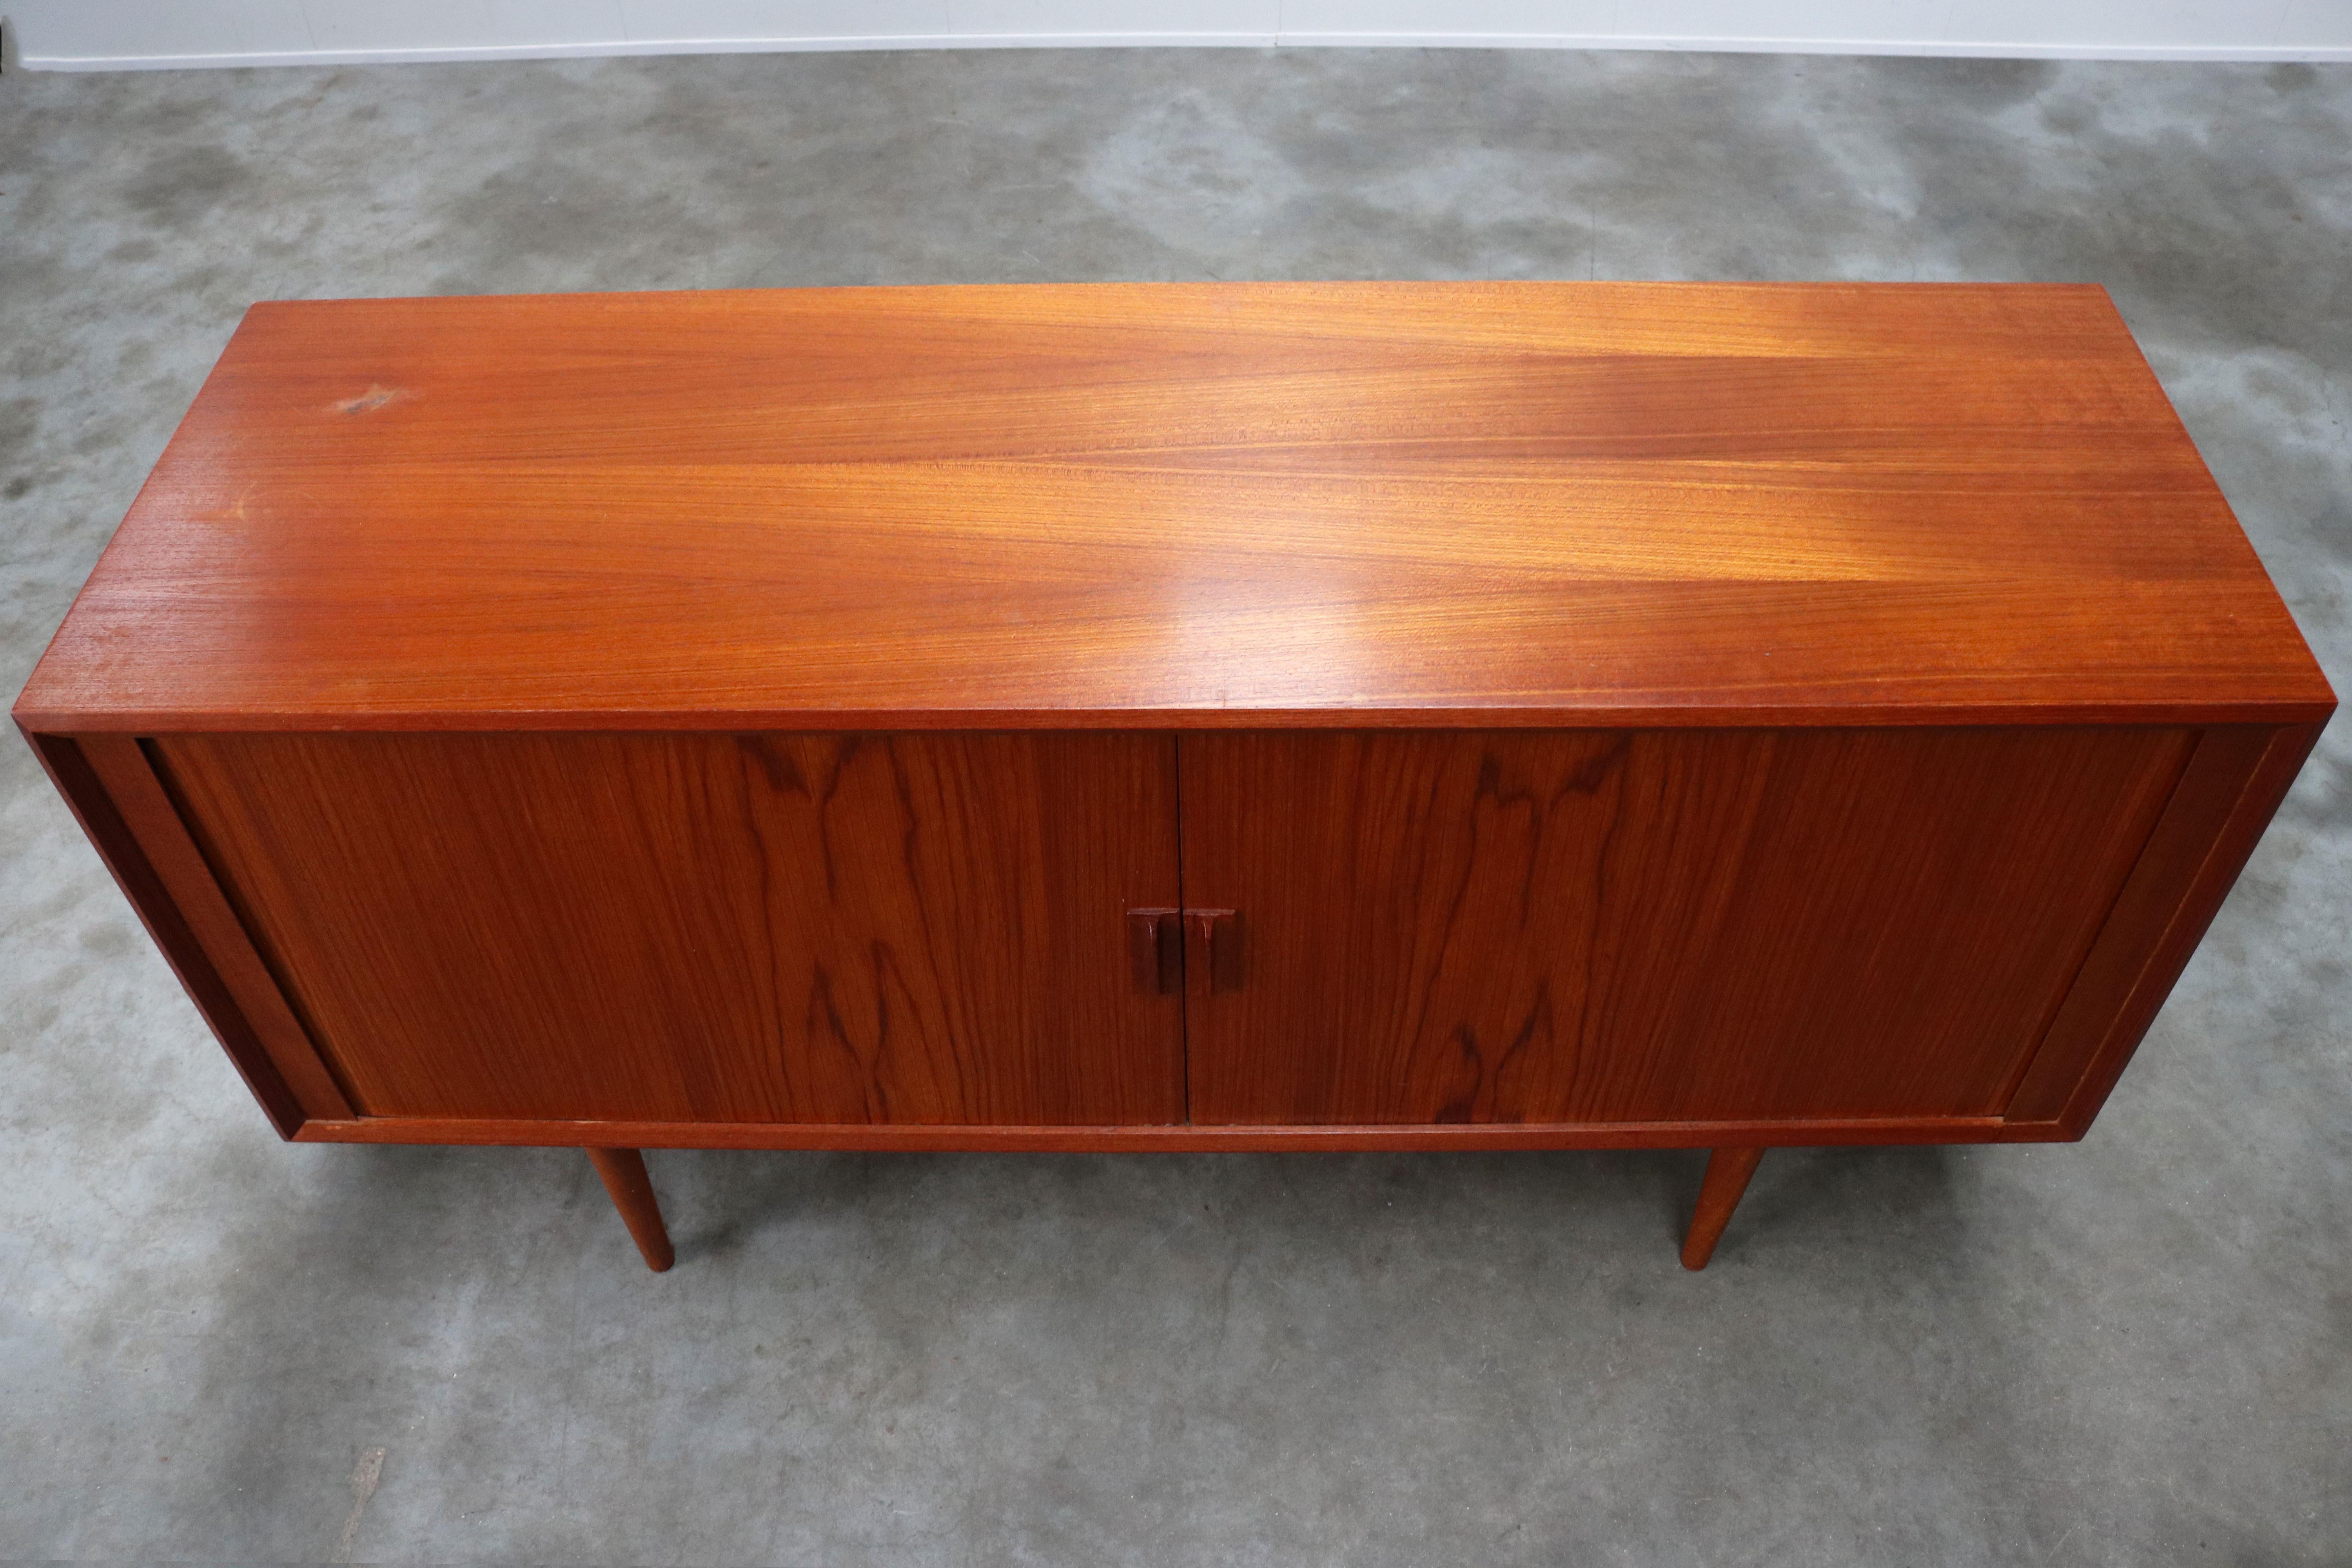 Small Rare Danish Sideboard / Credenza by Svend Aage Madsen for Faarup 1950 Teak 6